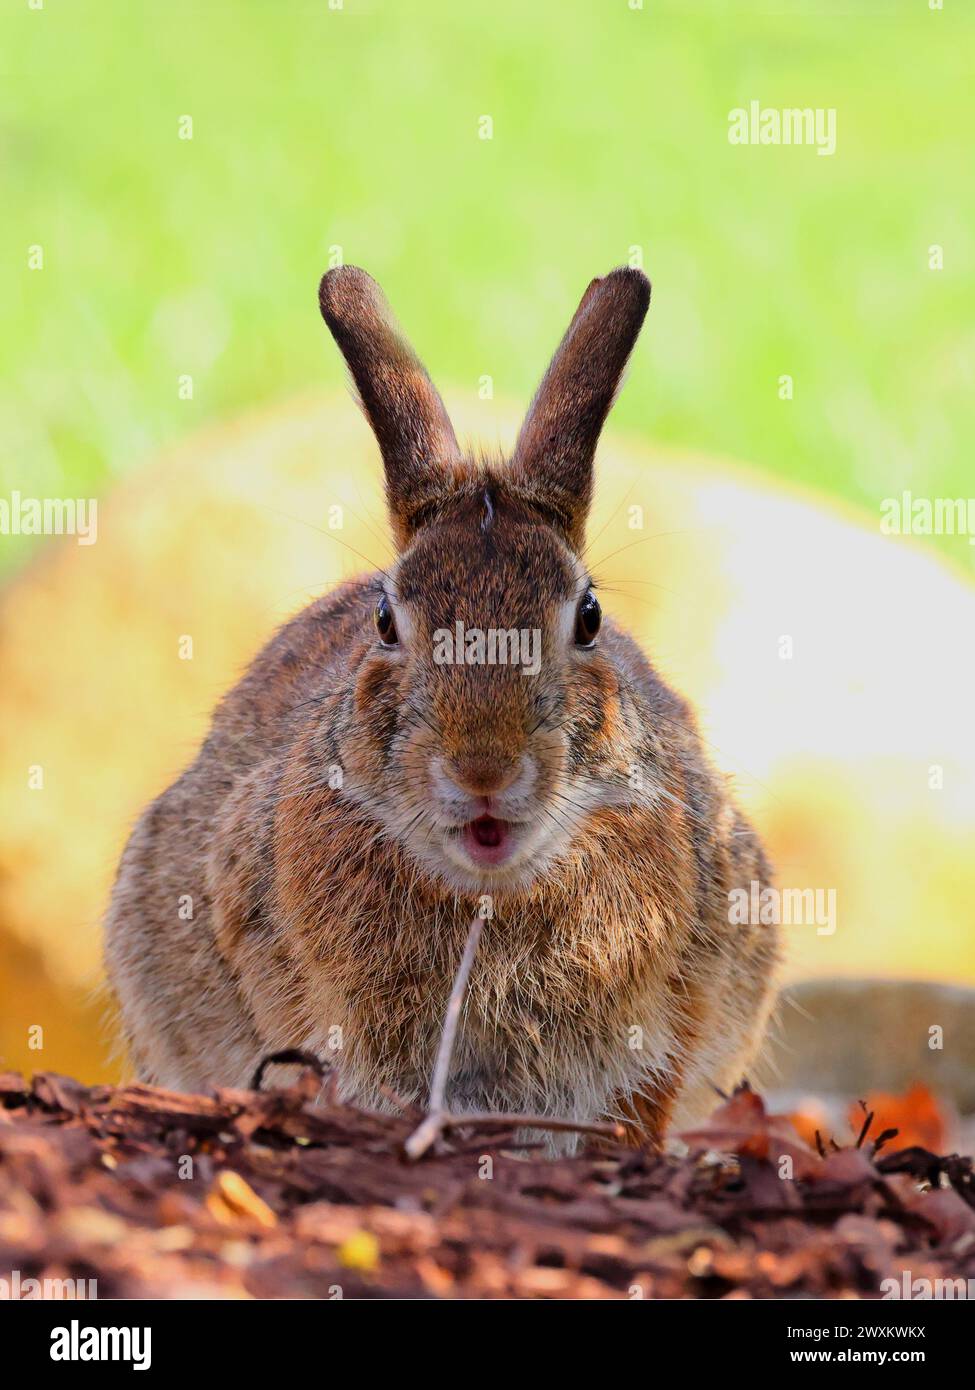 A bunny sits on ground with leaves in foreground and rock object in background Stock Photo